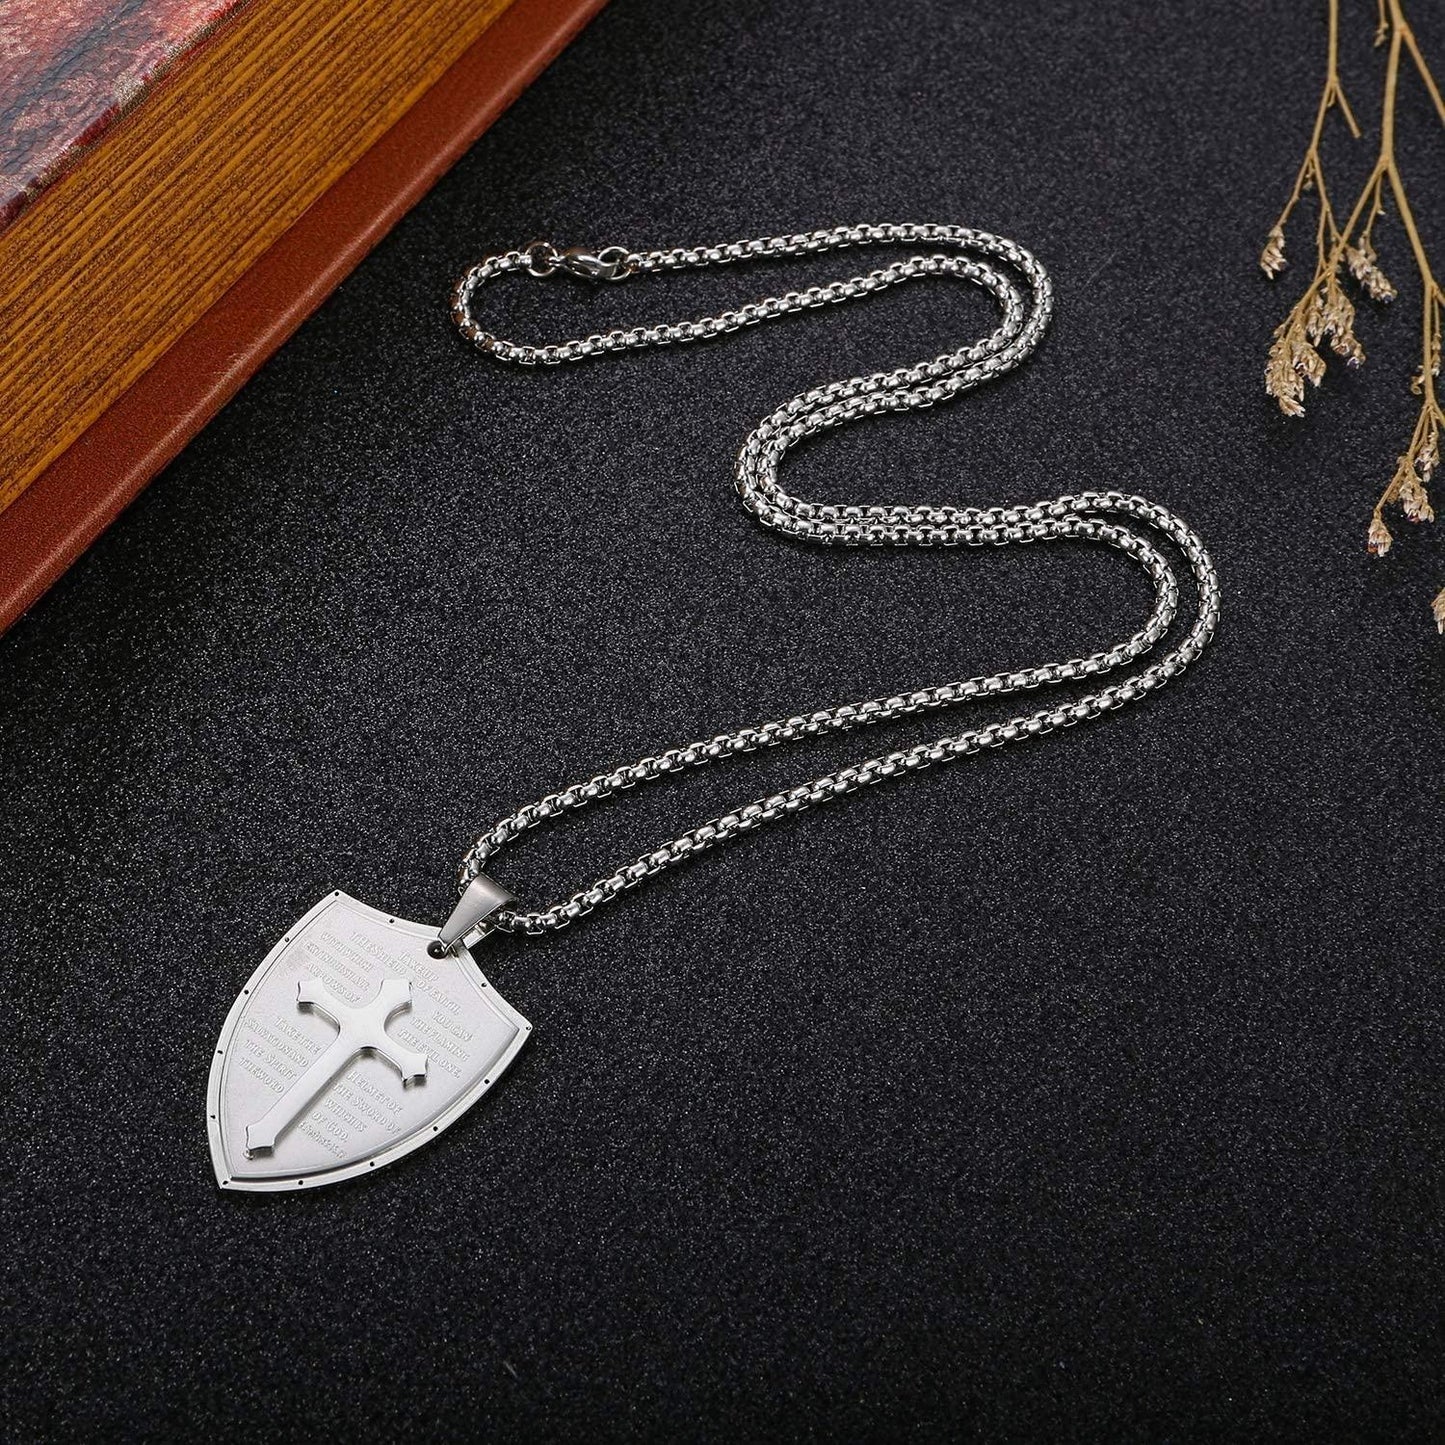 Cross Necklace for Men Shield Armor of God Ephesians 6:16-17; Stainless Steel Faith Pendant Necklace Christian Jewelry